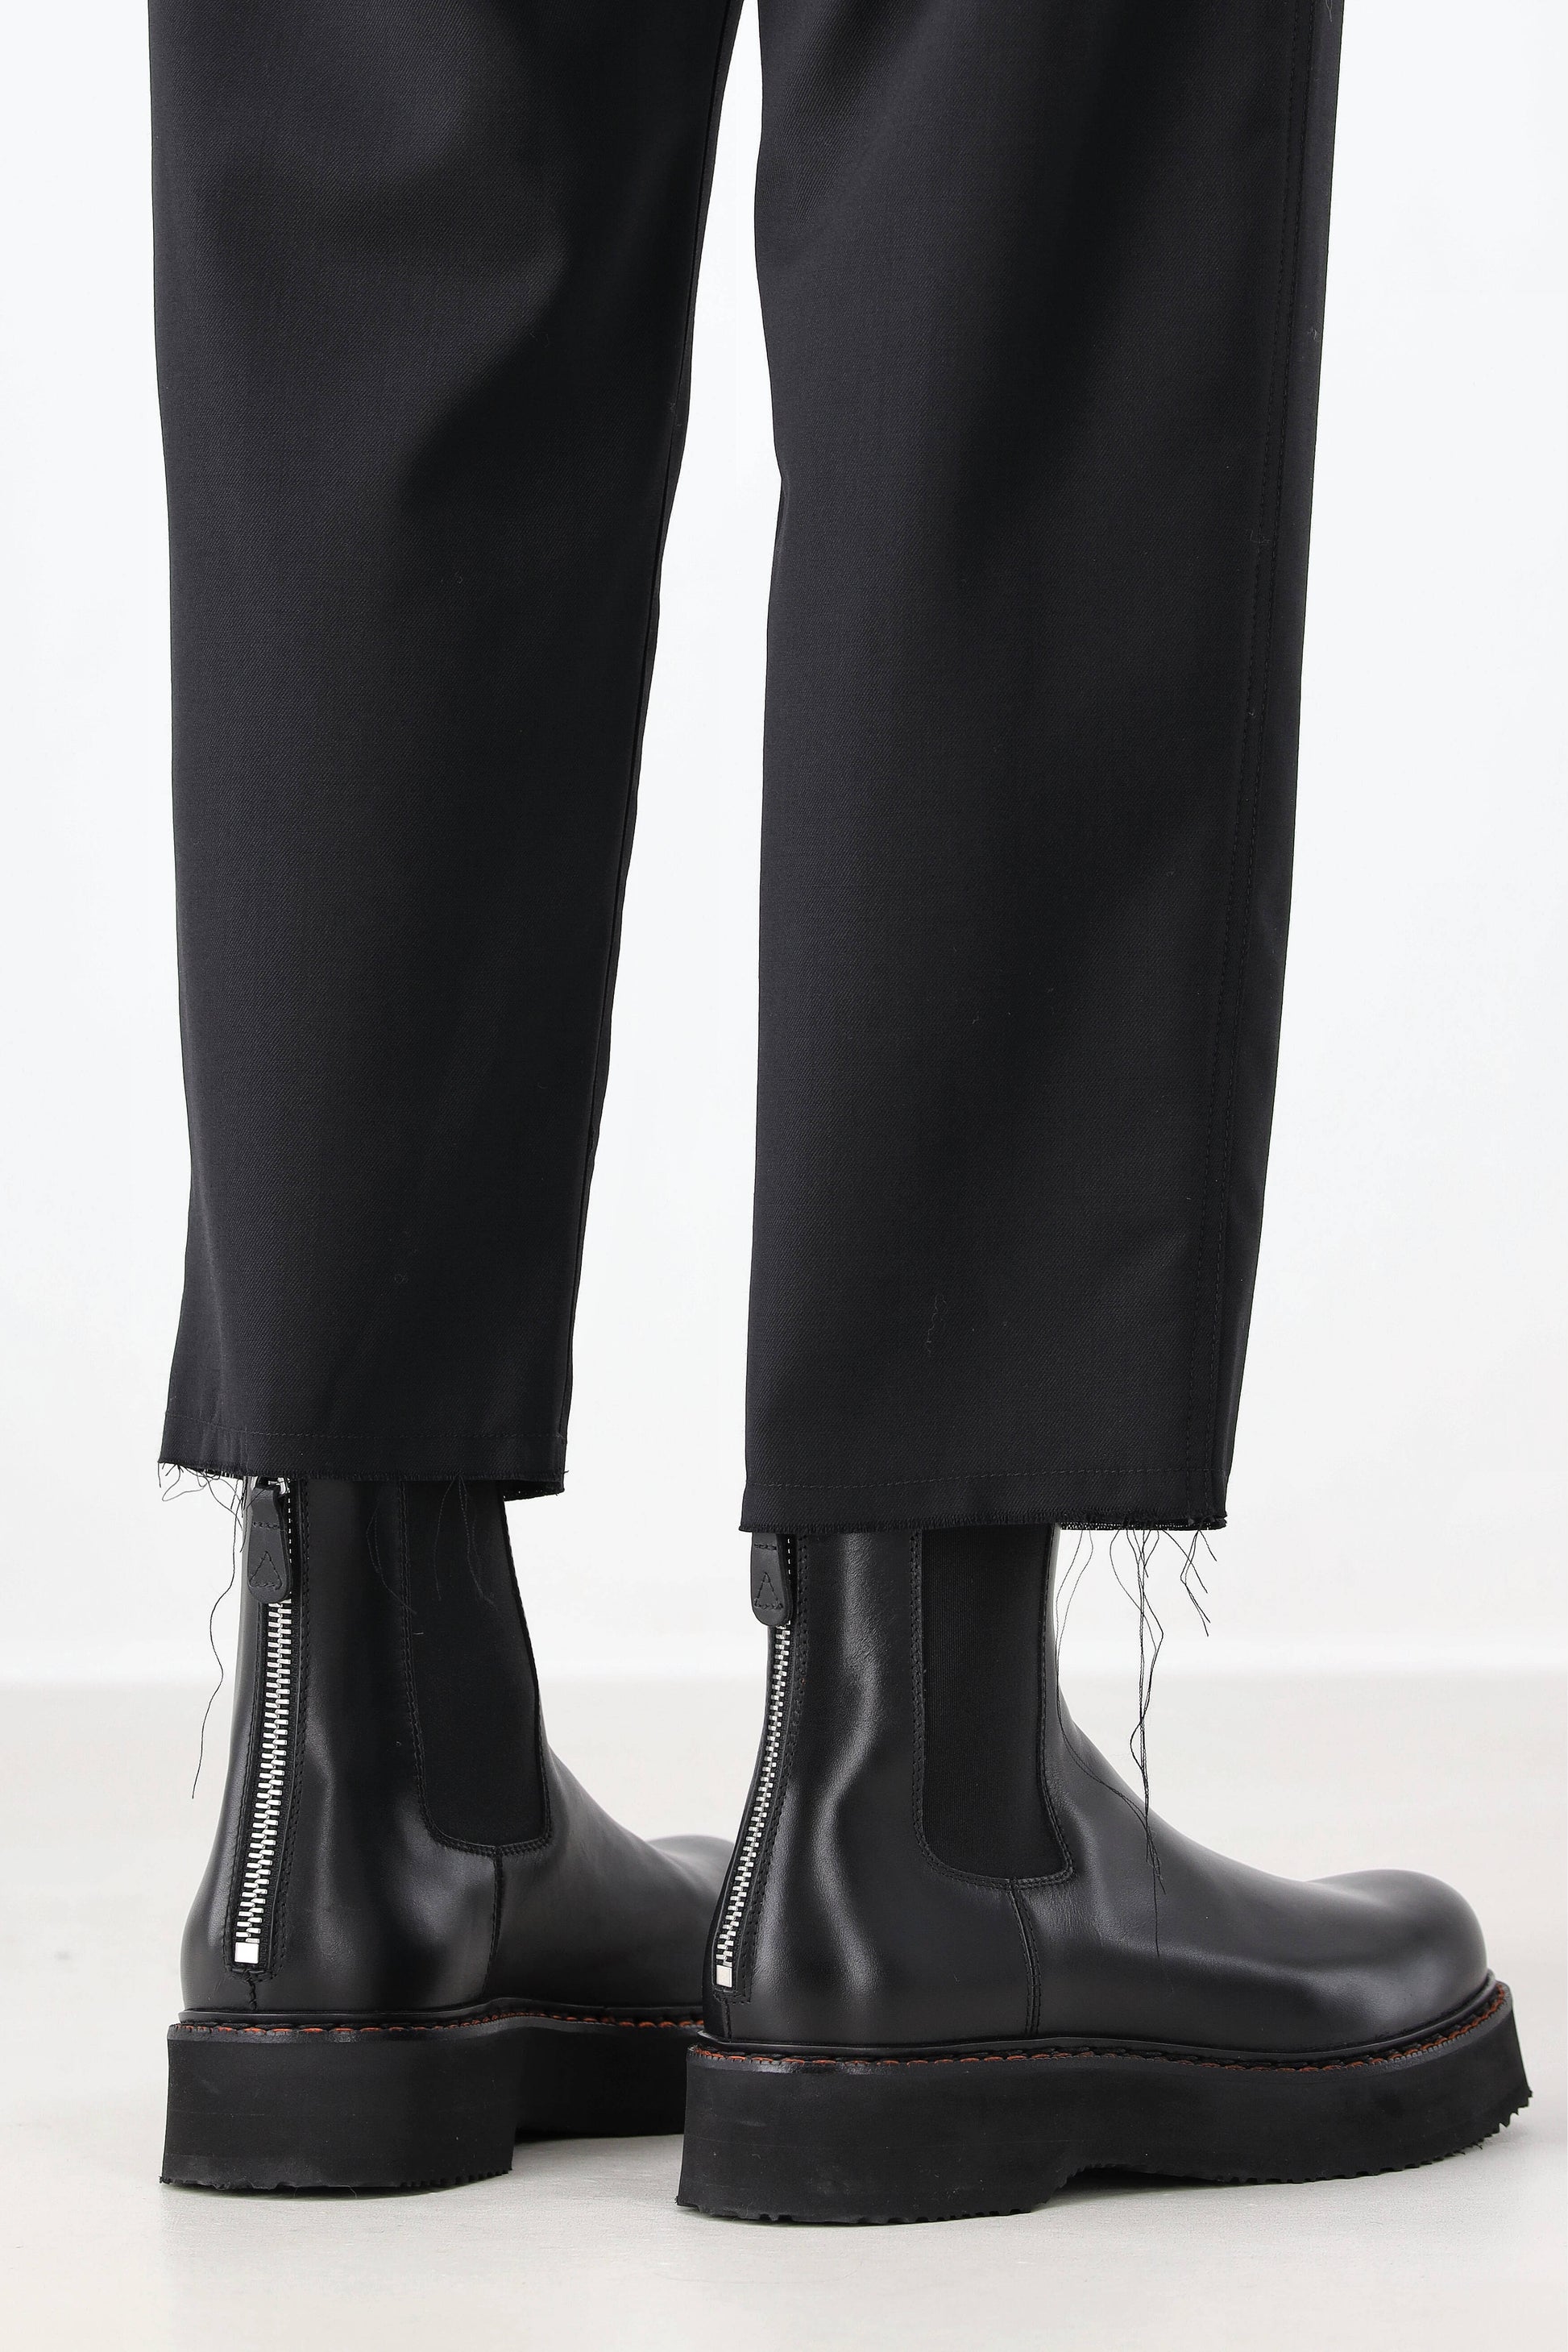 Boots Single Stack Chelsea in SchwarzR13 - Anita Hass